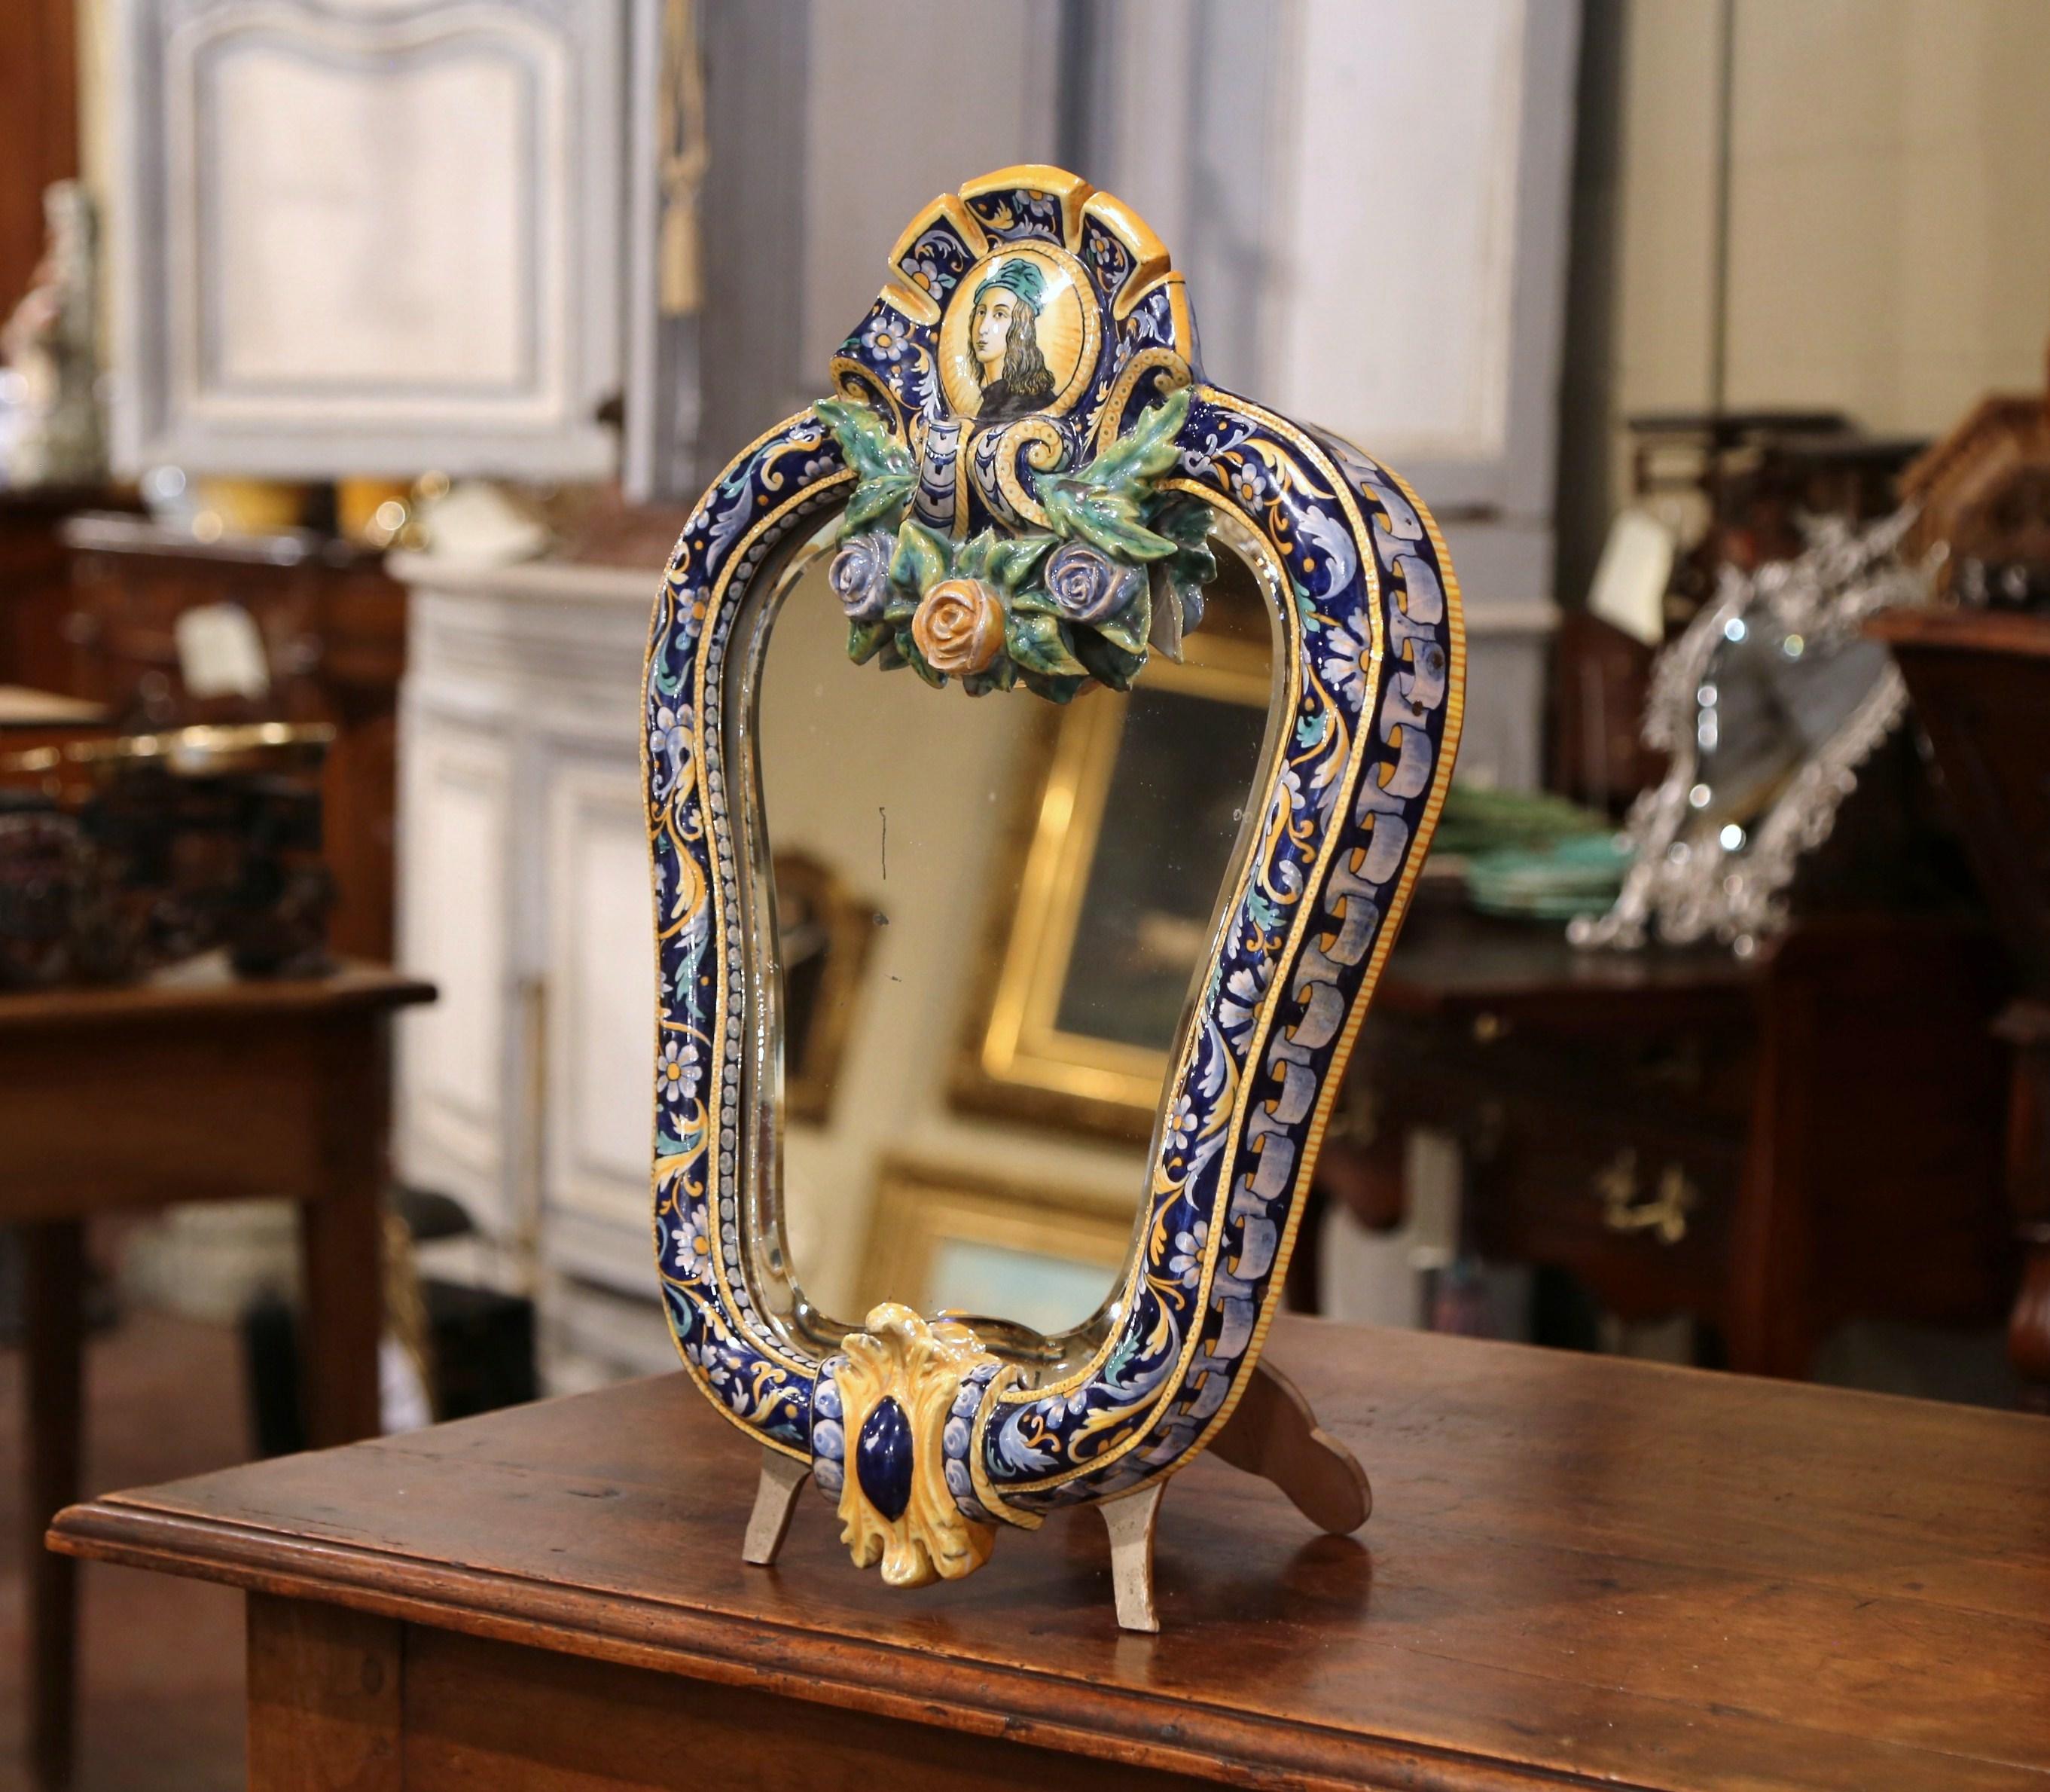 Decorate a counter with this elegant free-standing ceramic table mirror. Crafted in France circa 1860, the colorful, cartouche shaped mirror features a hand painted medallion with the profile of Joan of Arc, a pivotal character in French history.